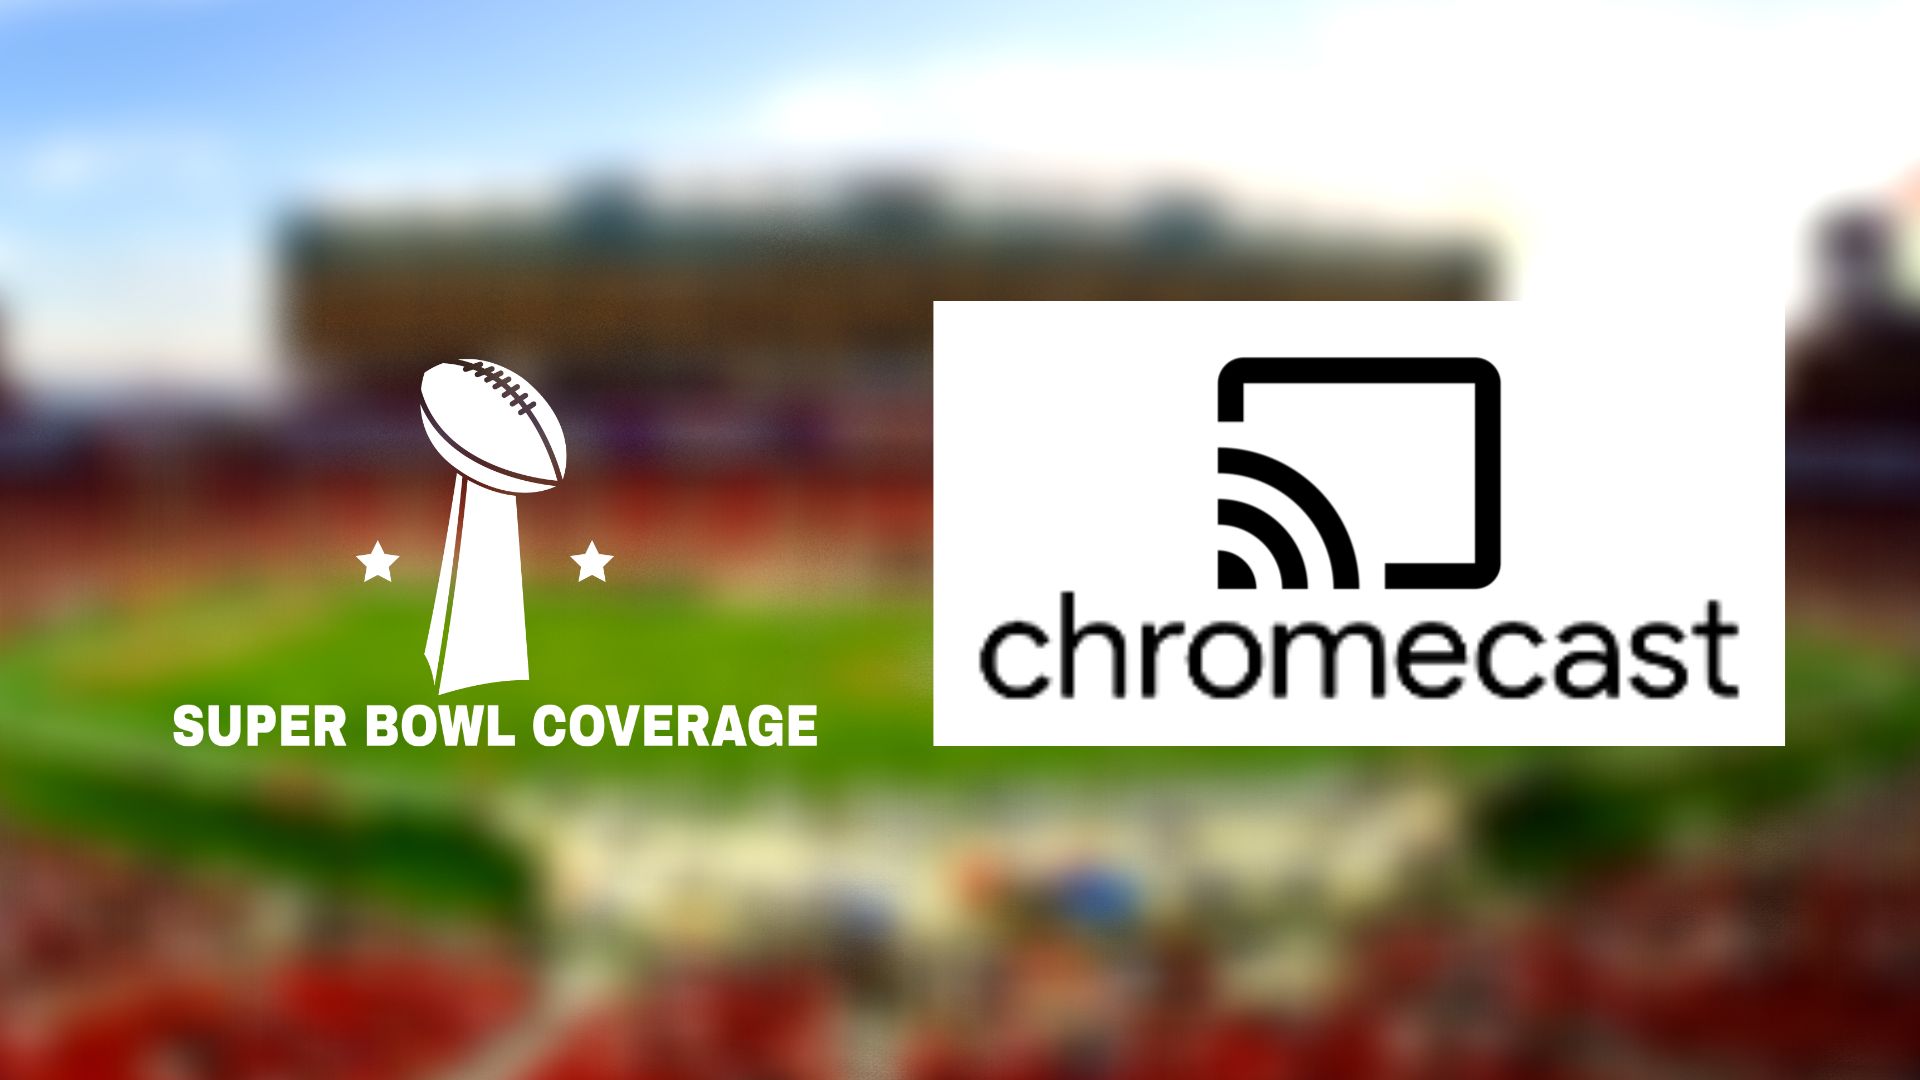 How to Watch Super Bowl on Chromecast